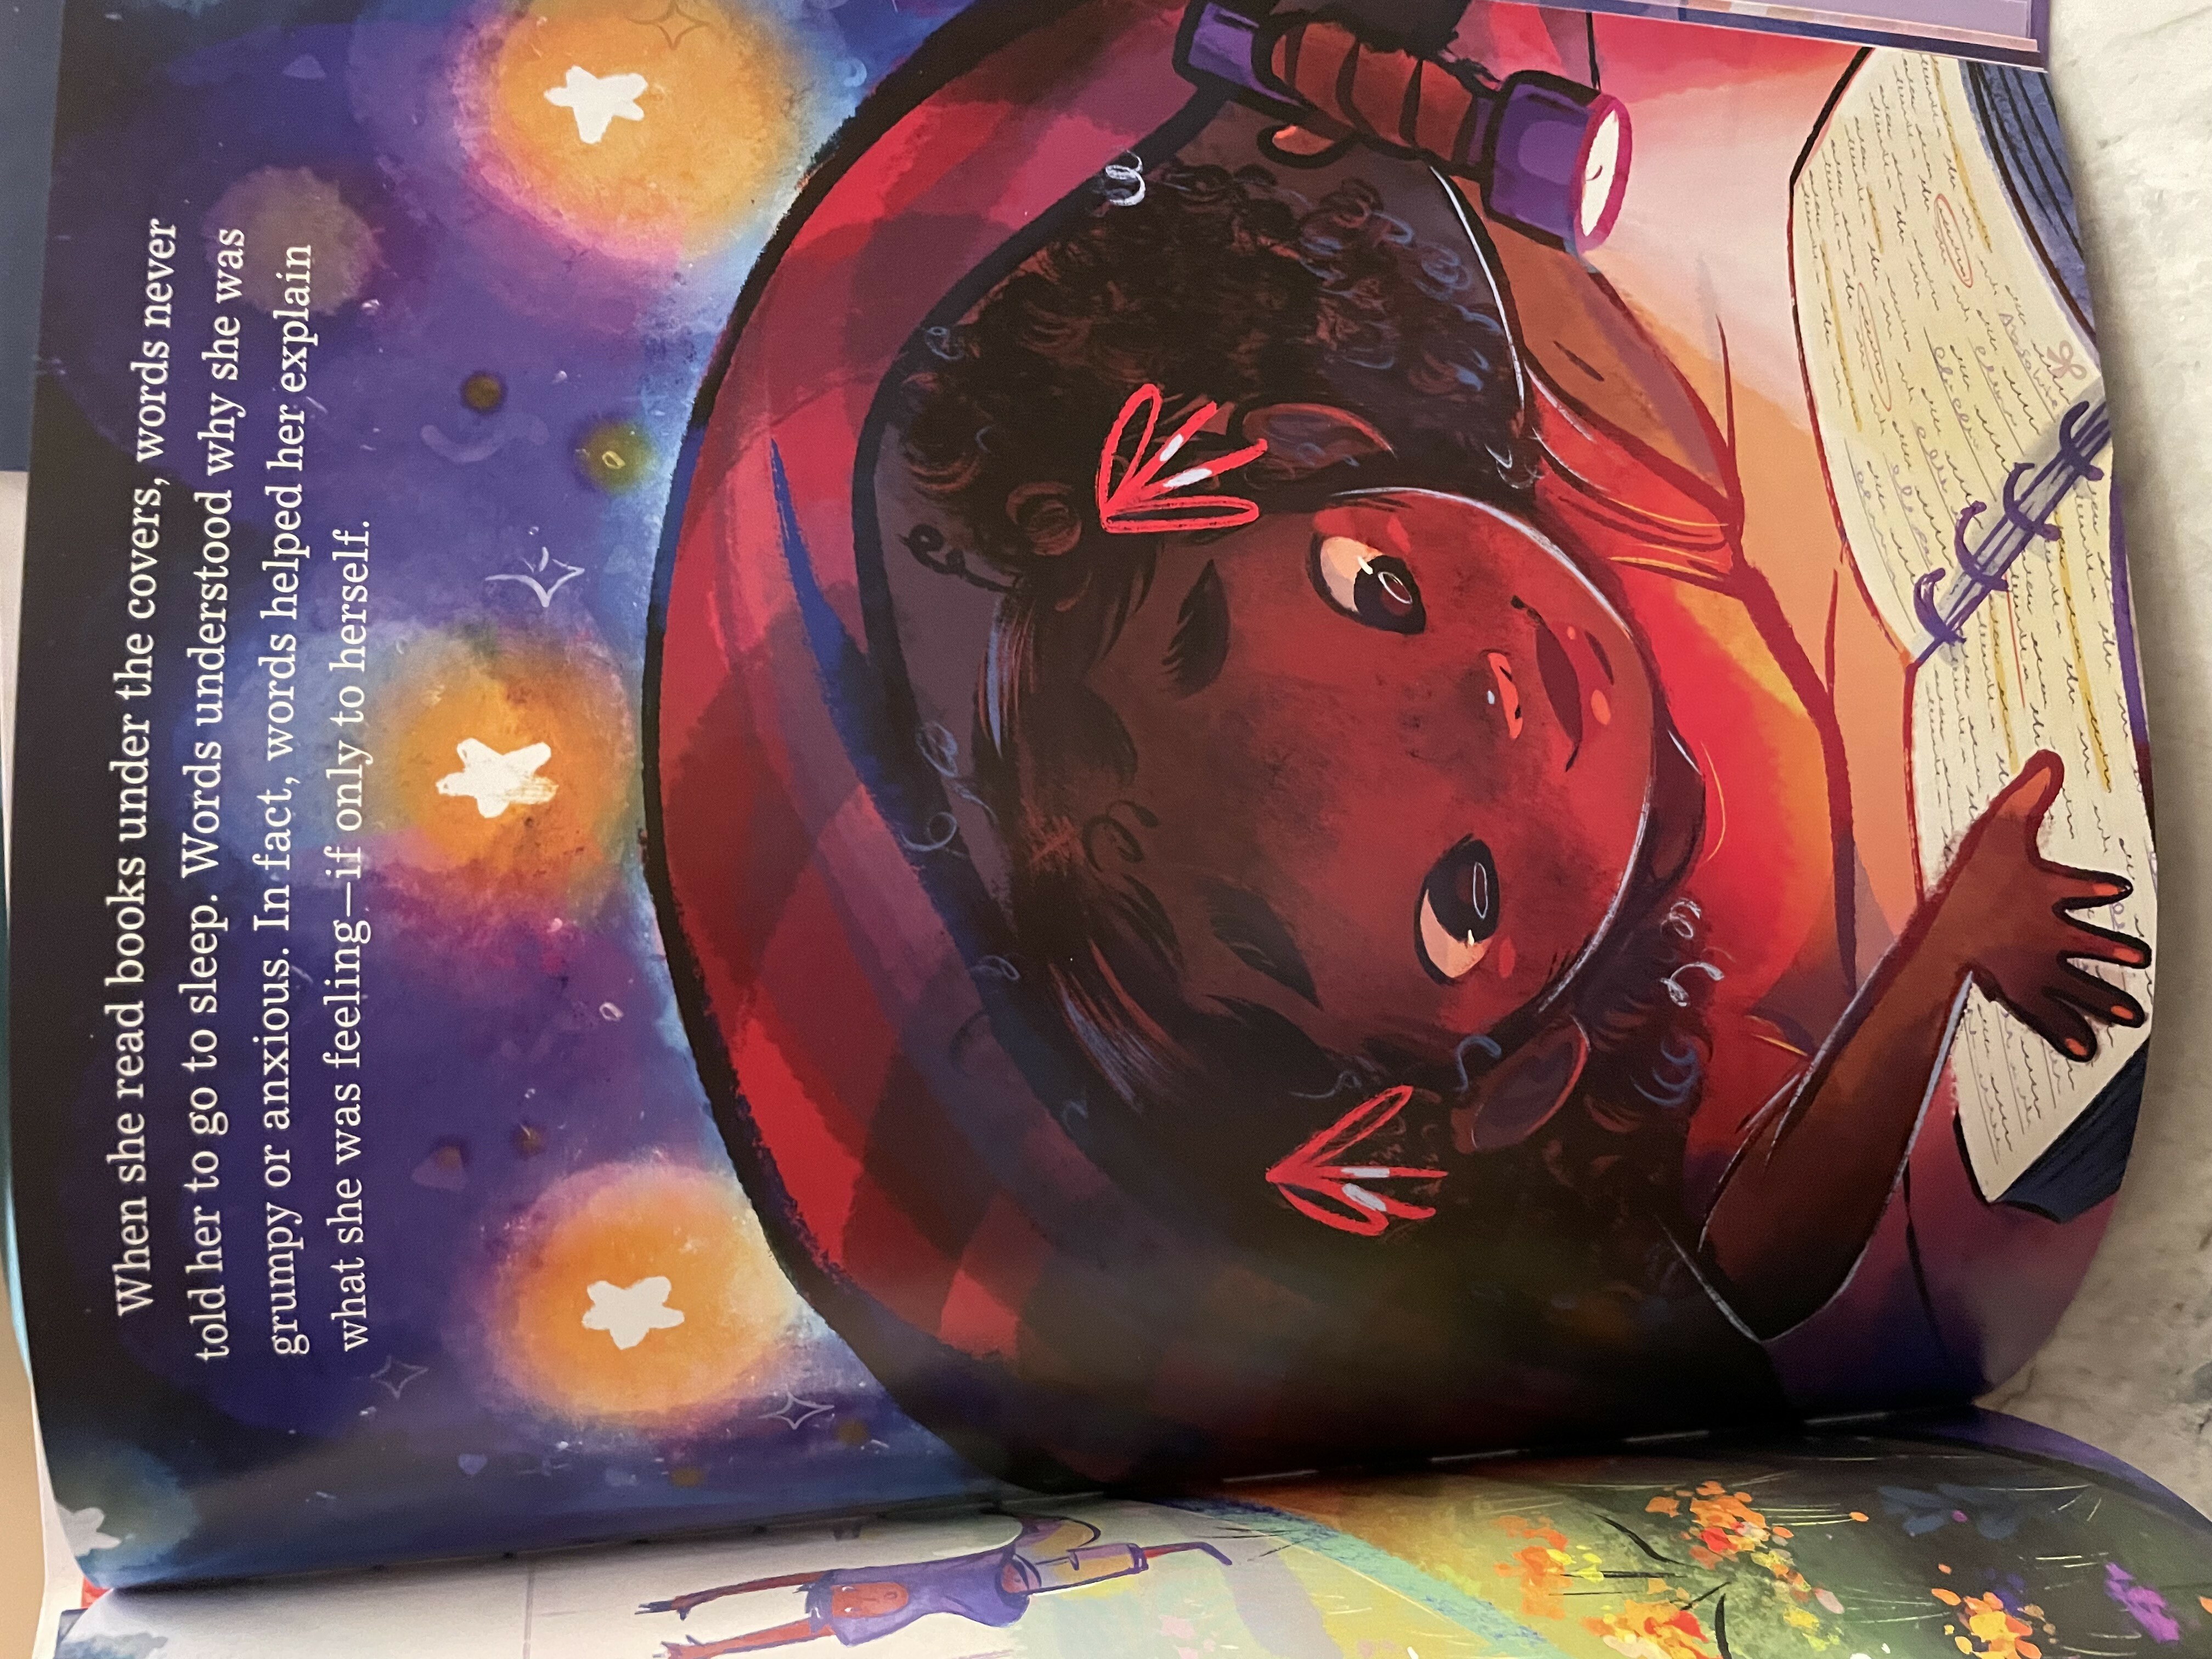 This picture shows a page of Stacey Abramsâ€™ book, Staceyâ€™s Extraordinary Words, where Stacey, a girl, is beneath her bed covers reading by flashlight.